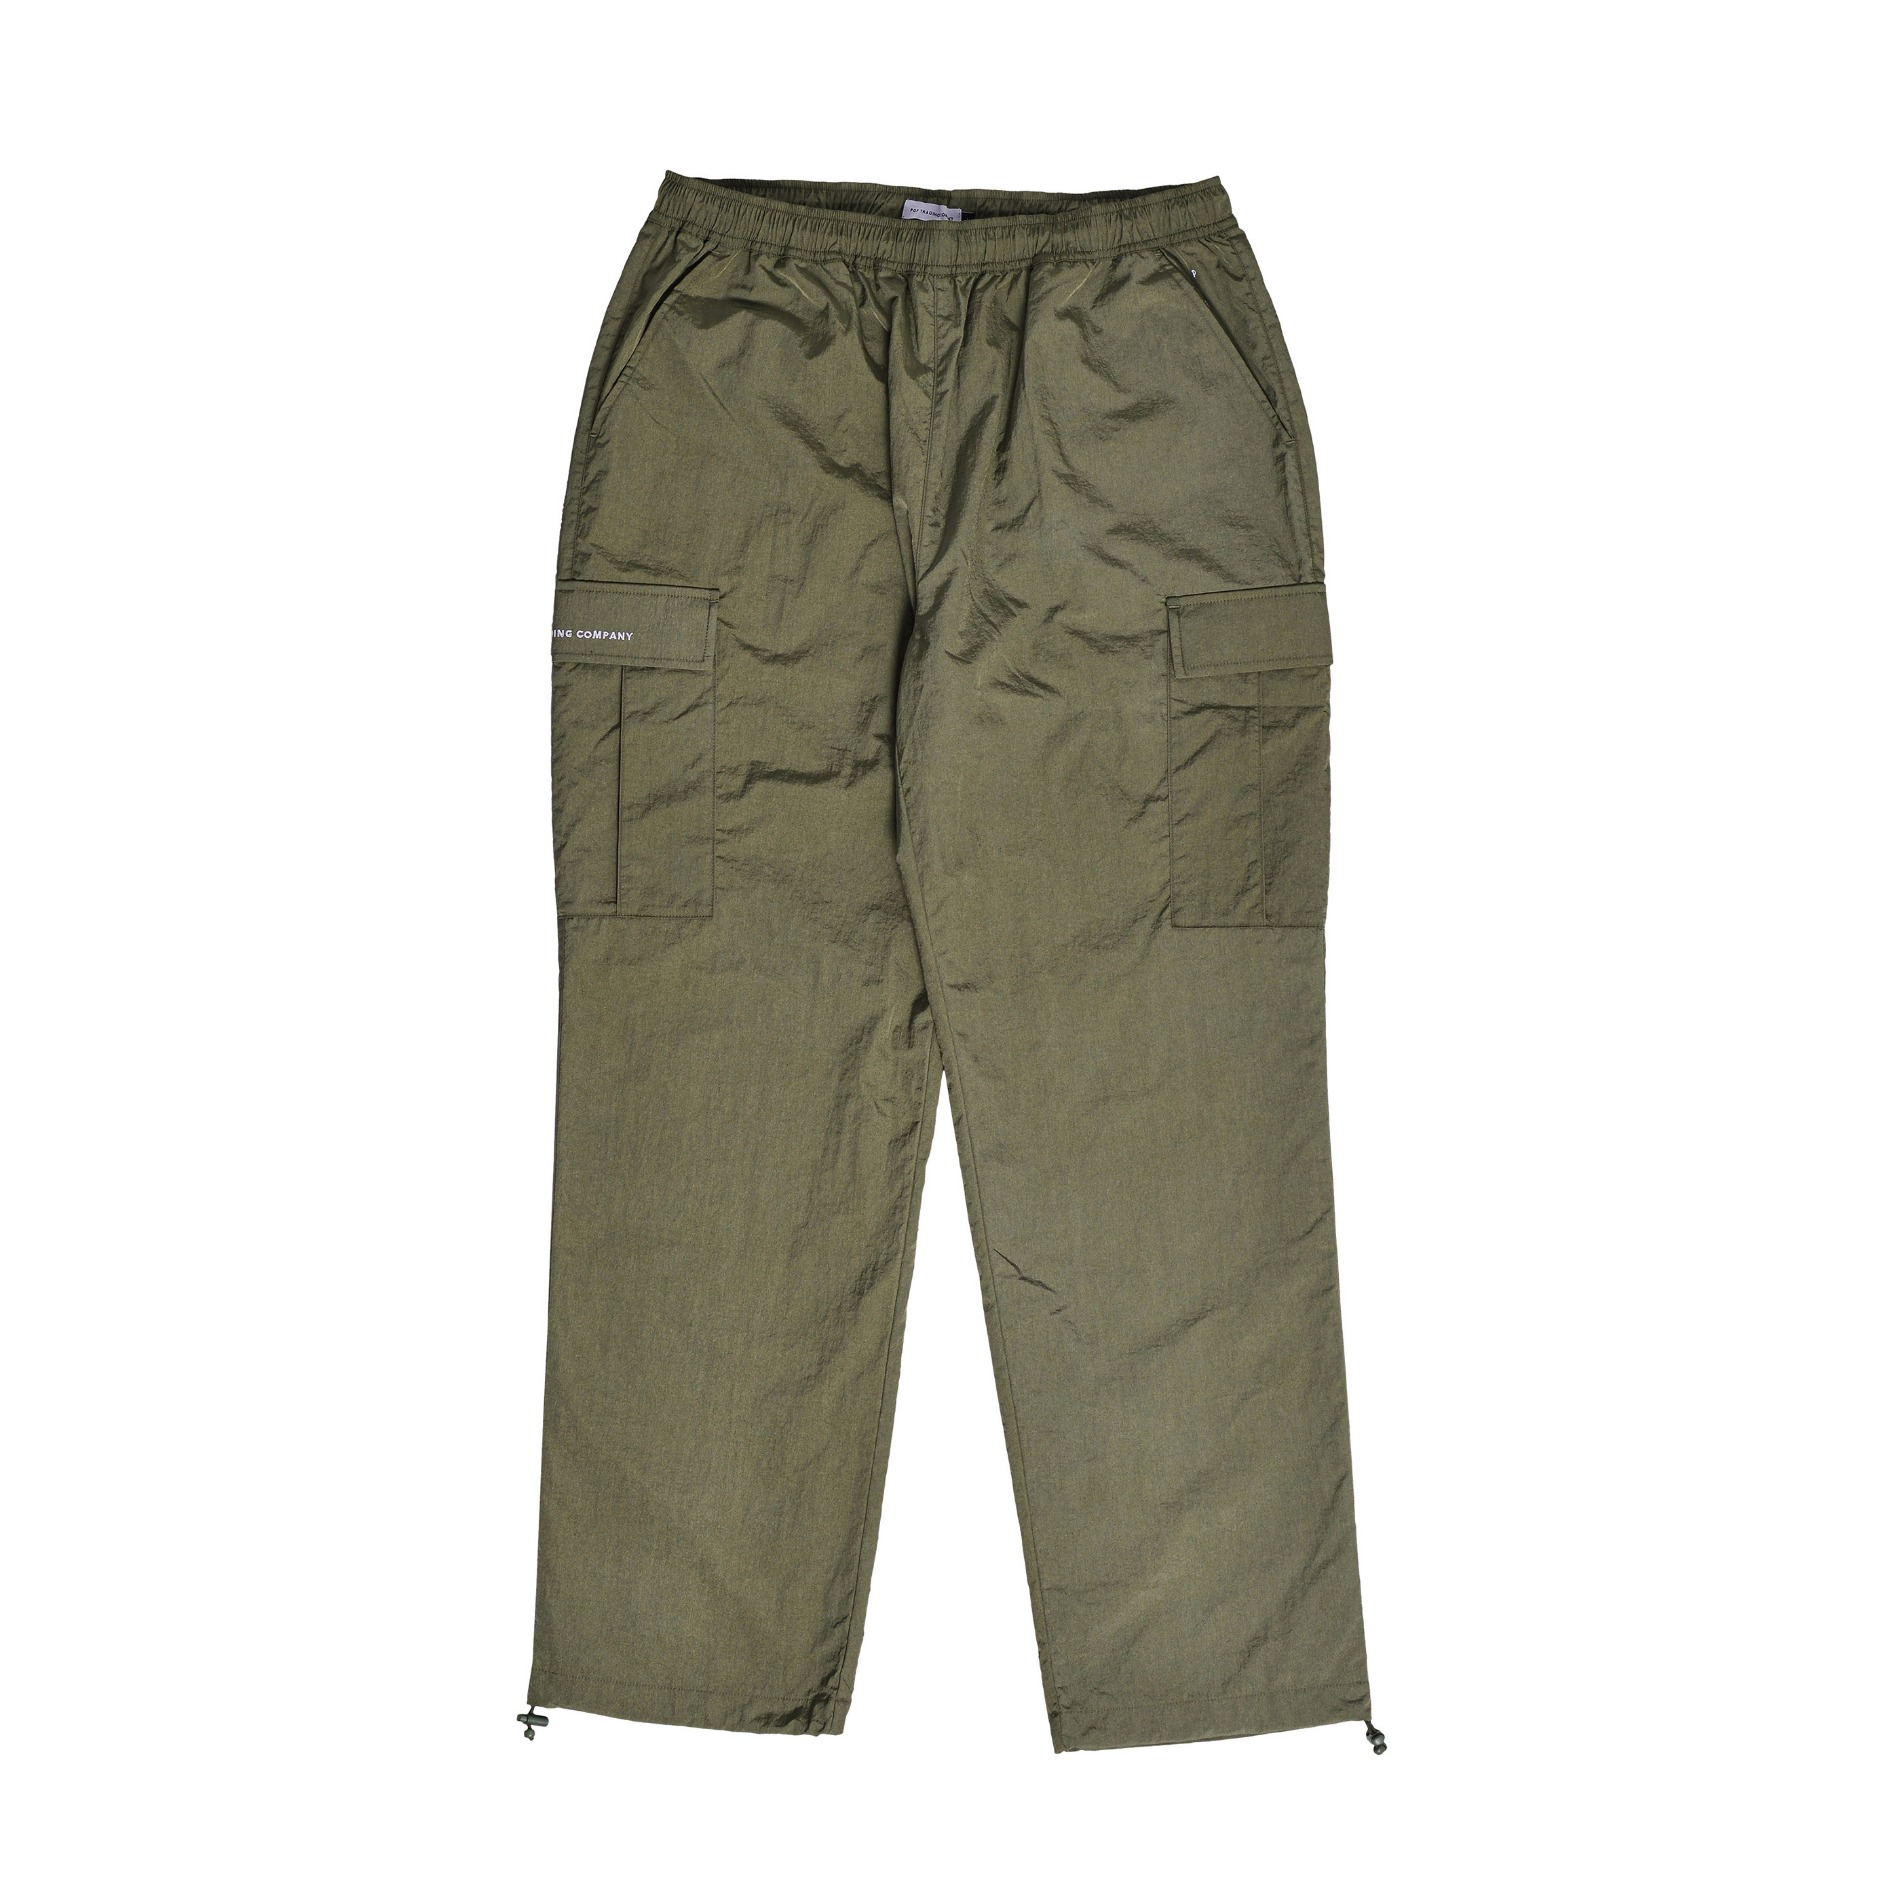 AW22 POP TRADING COMPANY CARGO TRACK PANTS OLIVE